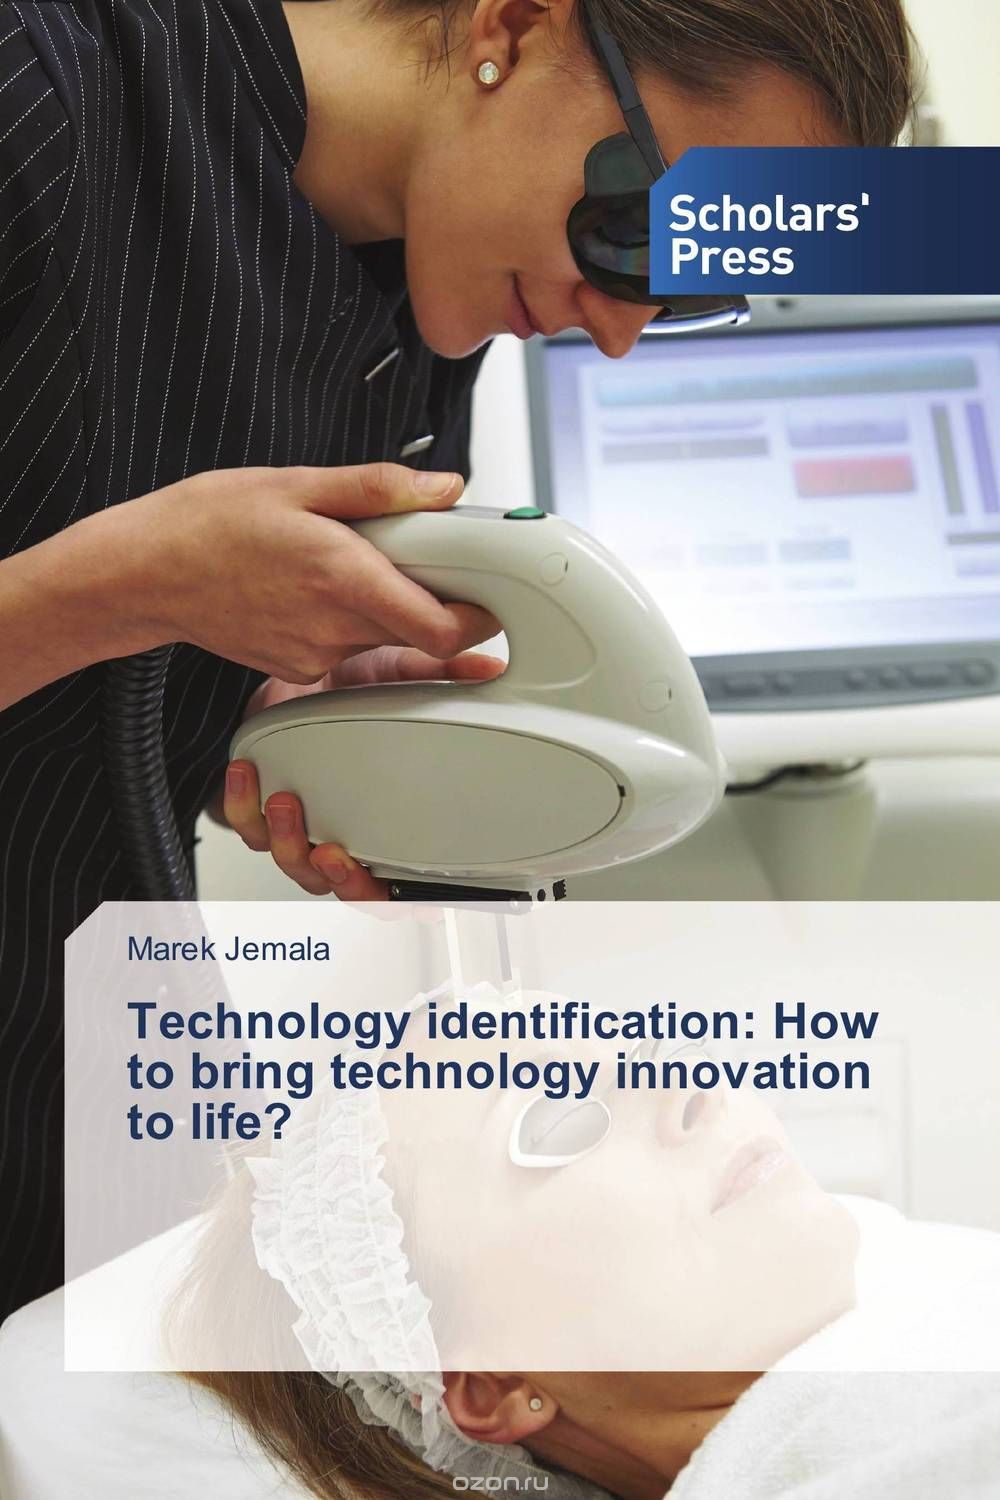 Technology identification: How to bring technology innovation to life?